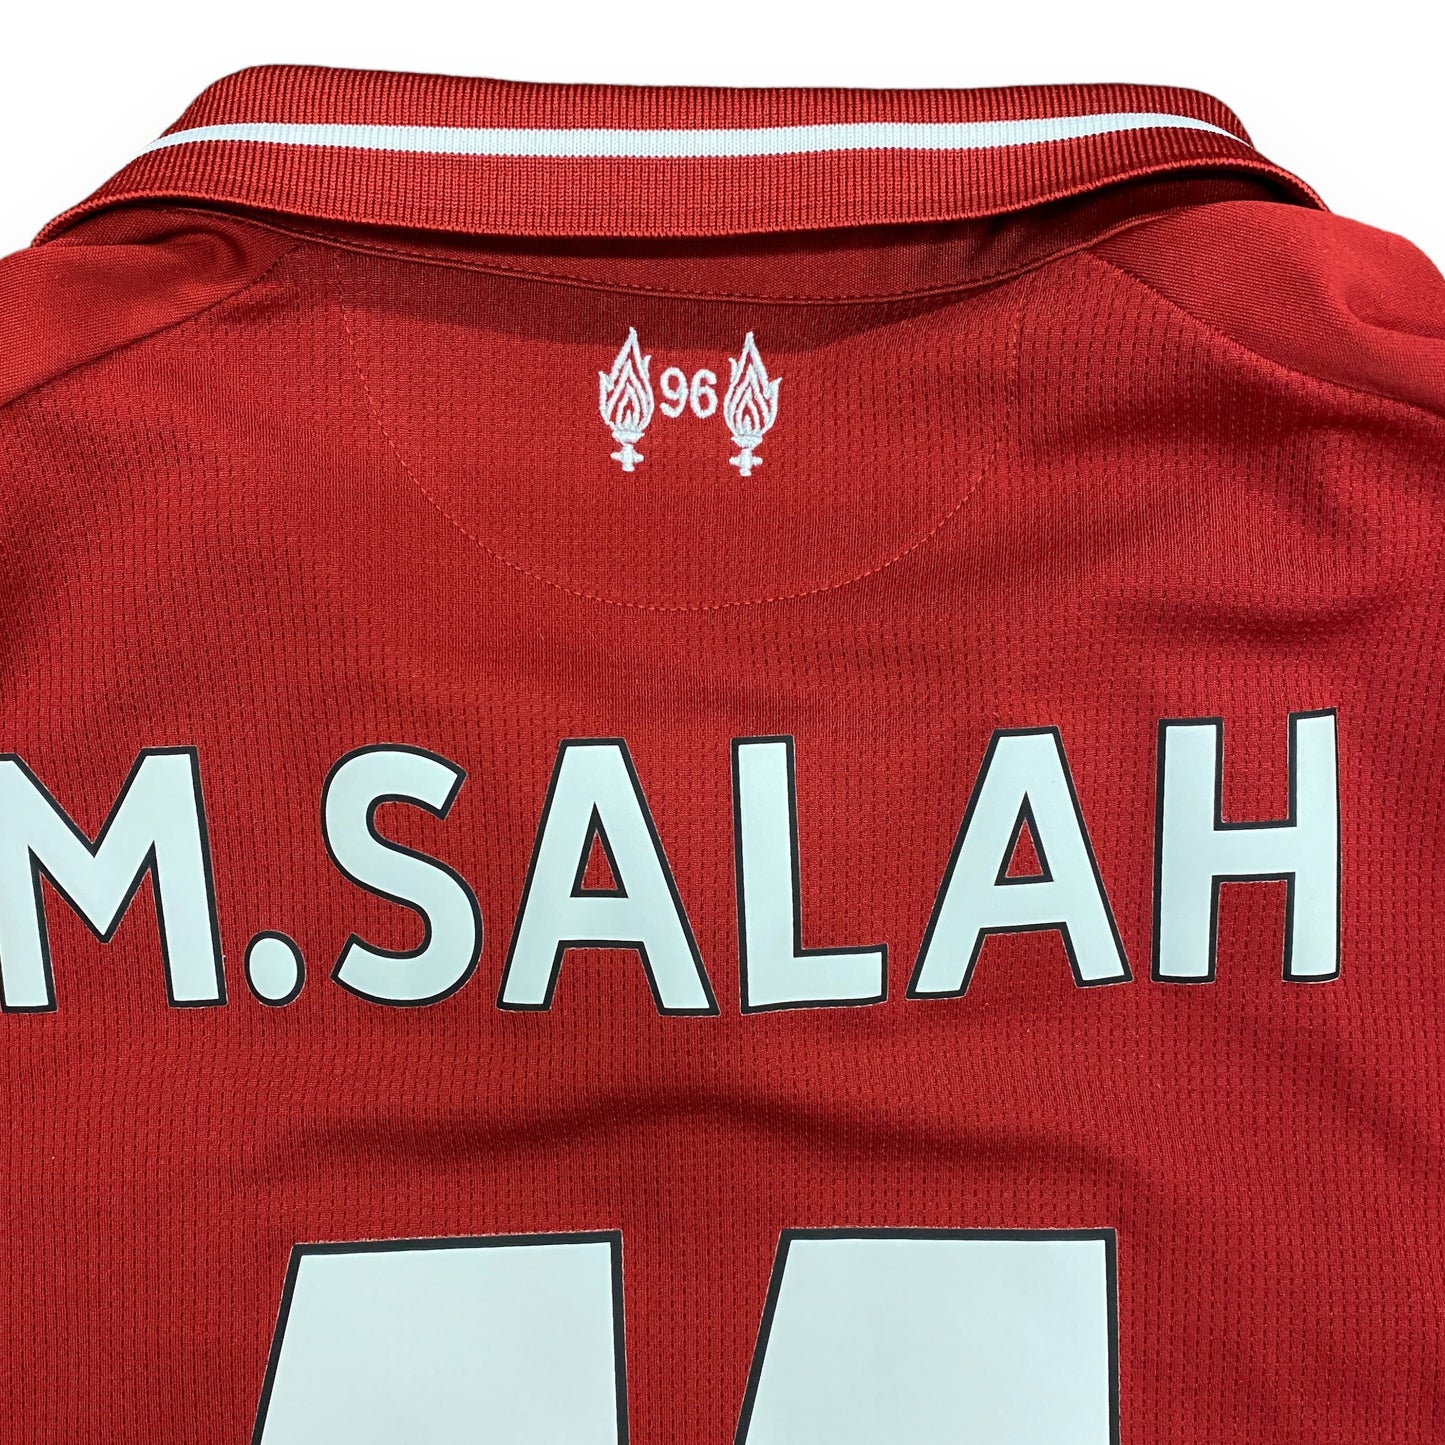 2018/2019 Liverpool FC "M. Salah" Official Soccer Jersey - Size Large